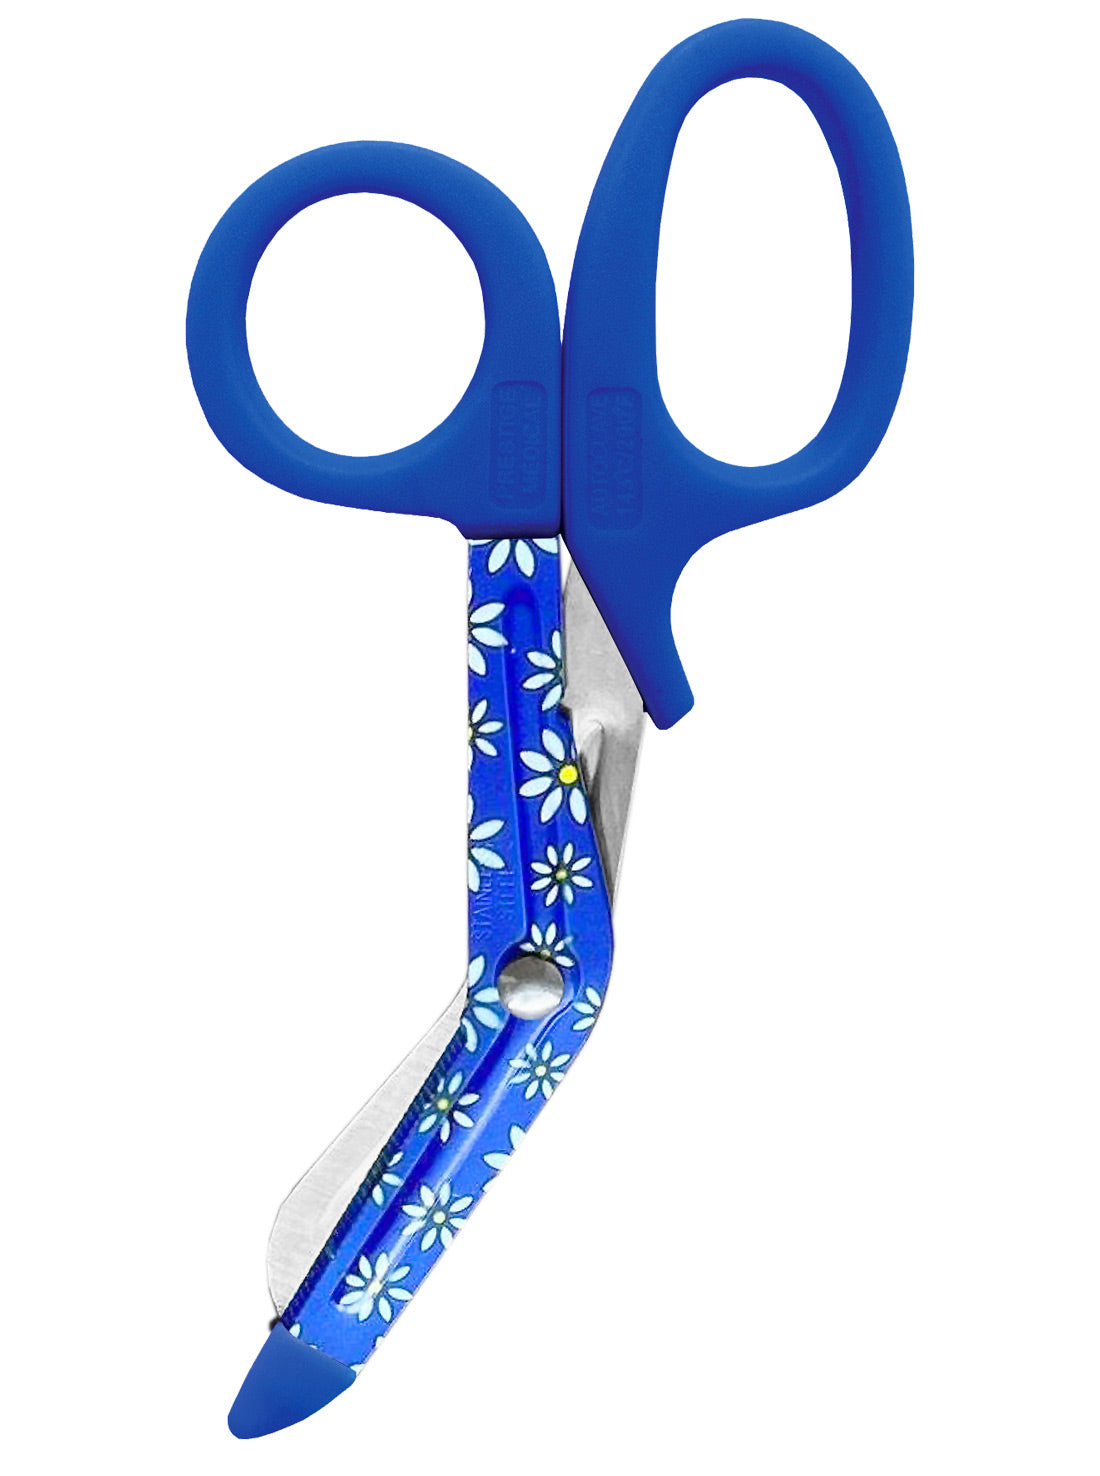 5.5" StyleMate Utility Scissor  by Prestige / Daisies Royal